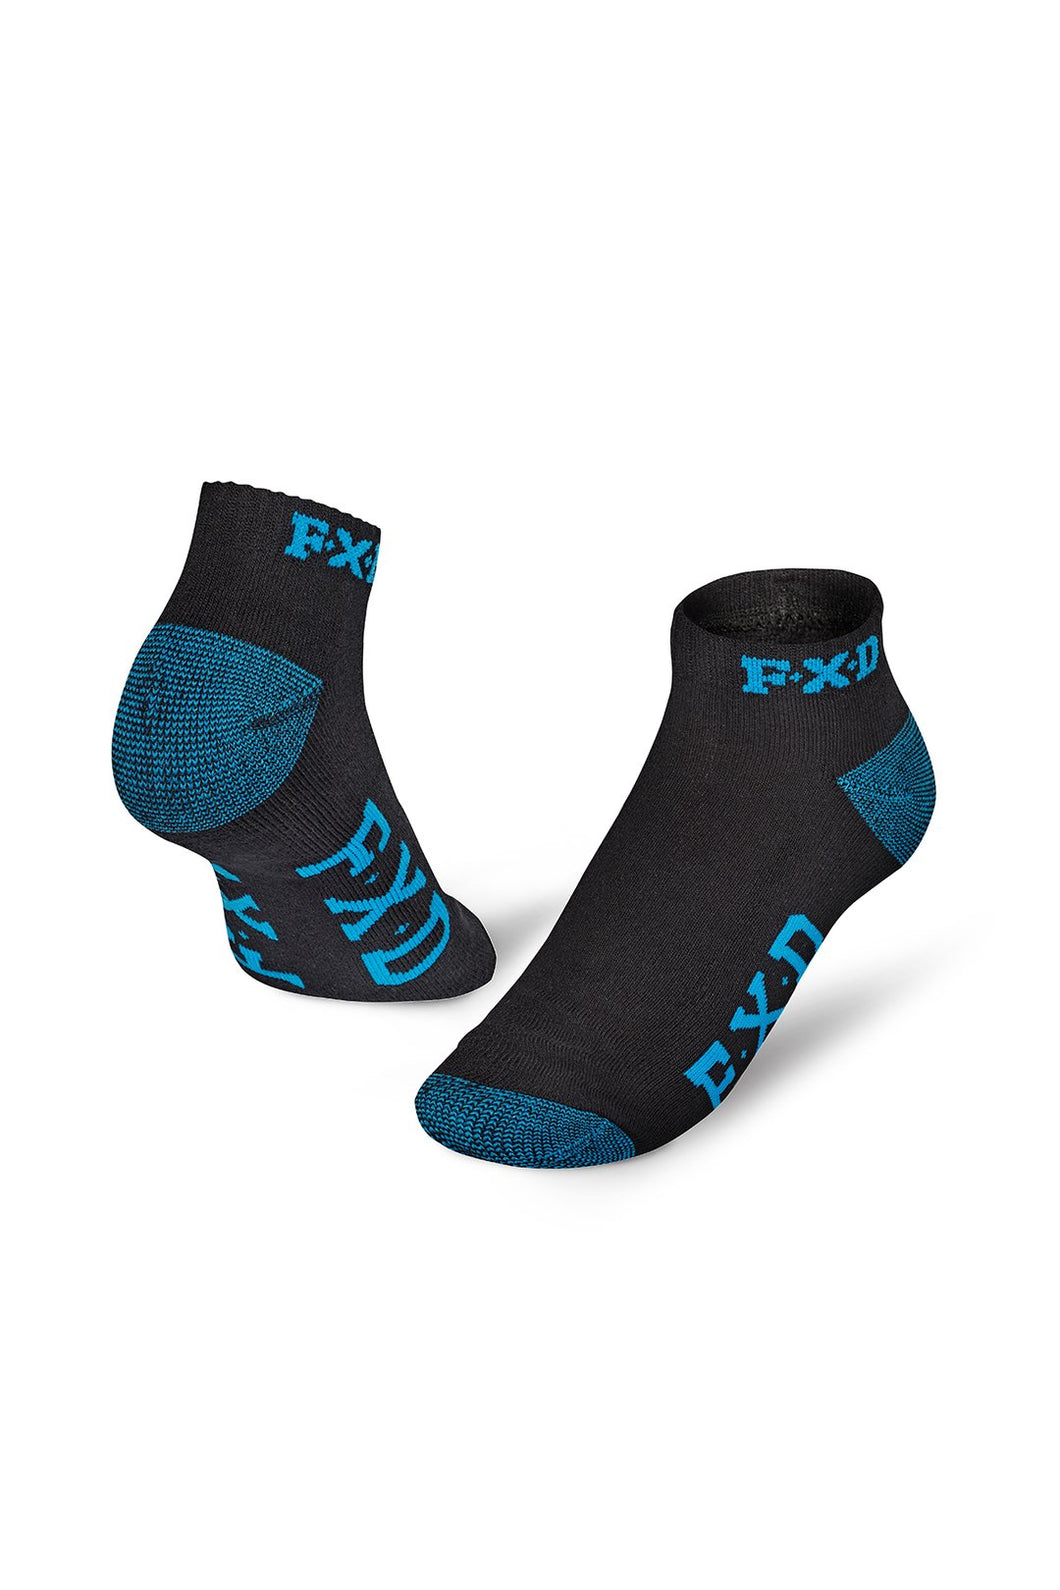 FXD SK-3 Ankle Work Sock - 5 Pack